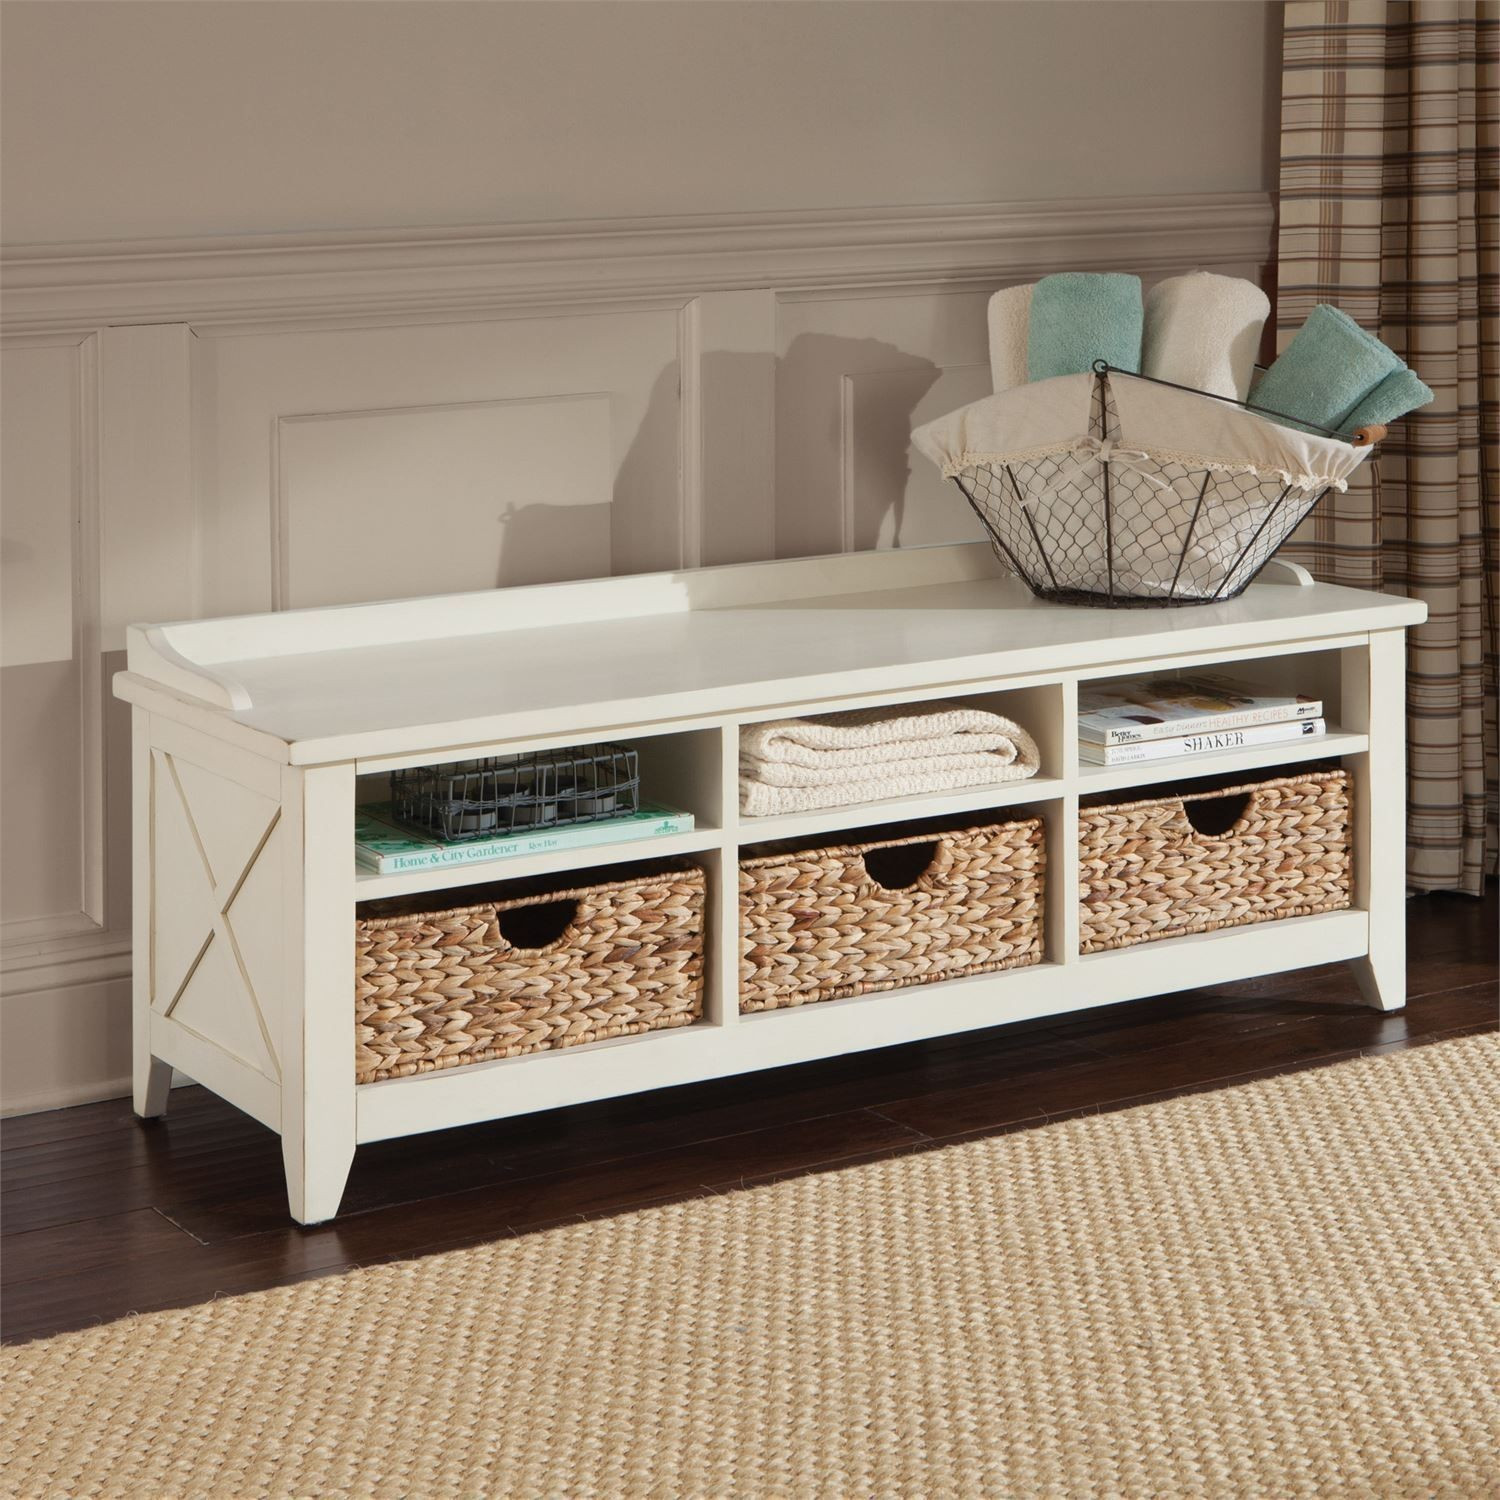 White Cubby Storage Bench
 Hearthstone Rustic White Cubby Storage Bench from Liberty